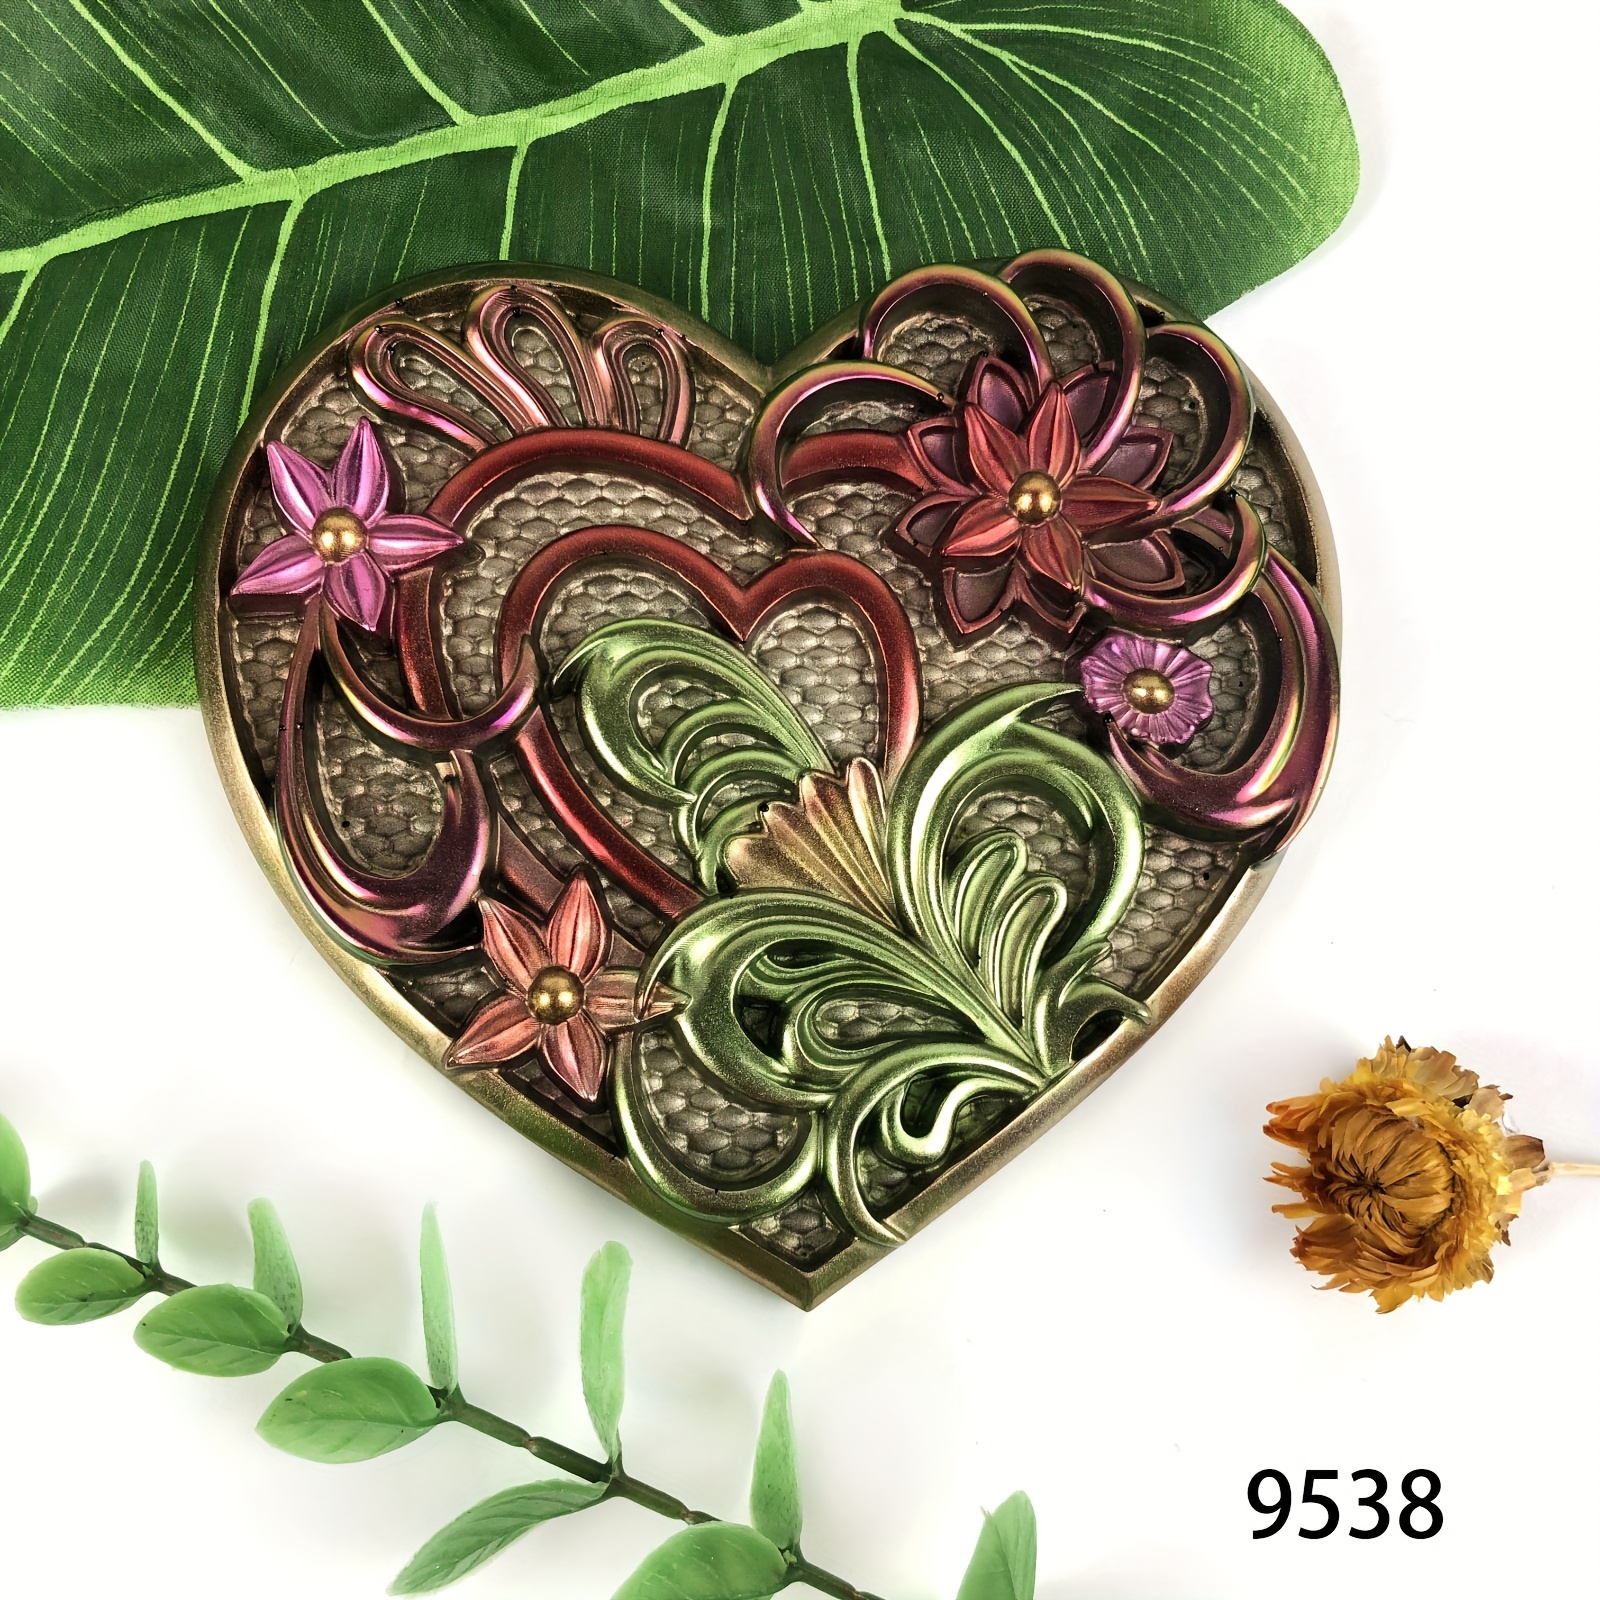 CrazyMold's Heart Shaped Flower Relief Decoration Resin Mold - Where Love  Blooms in Craft!